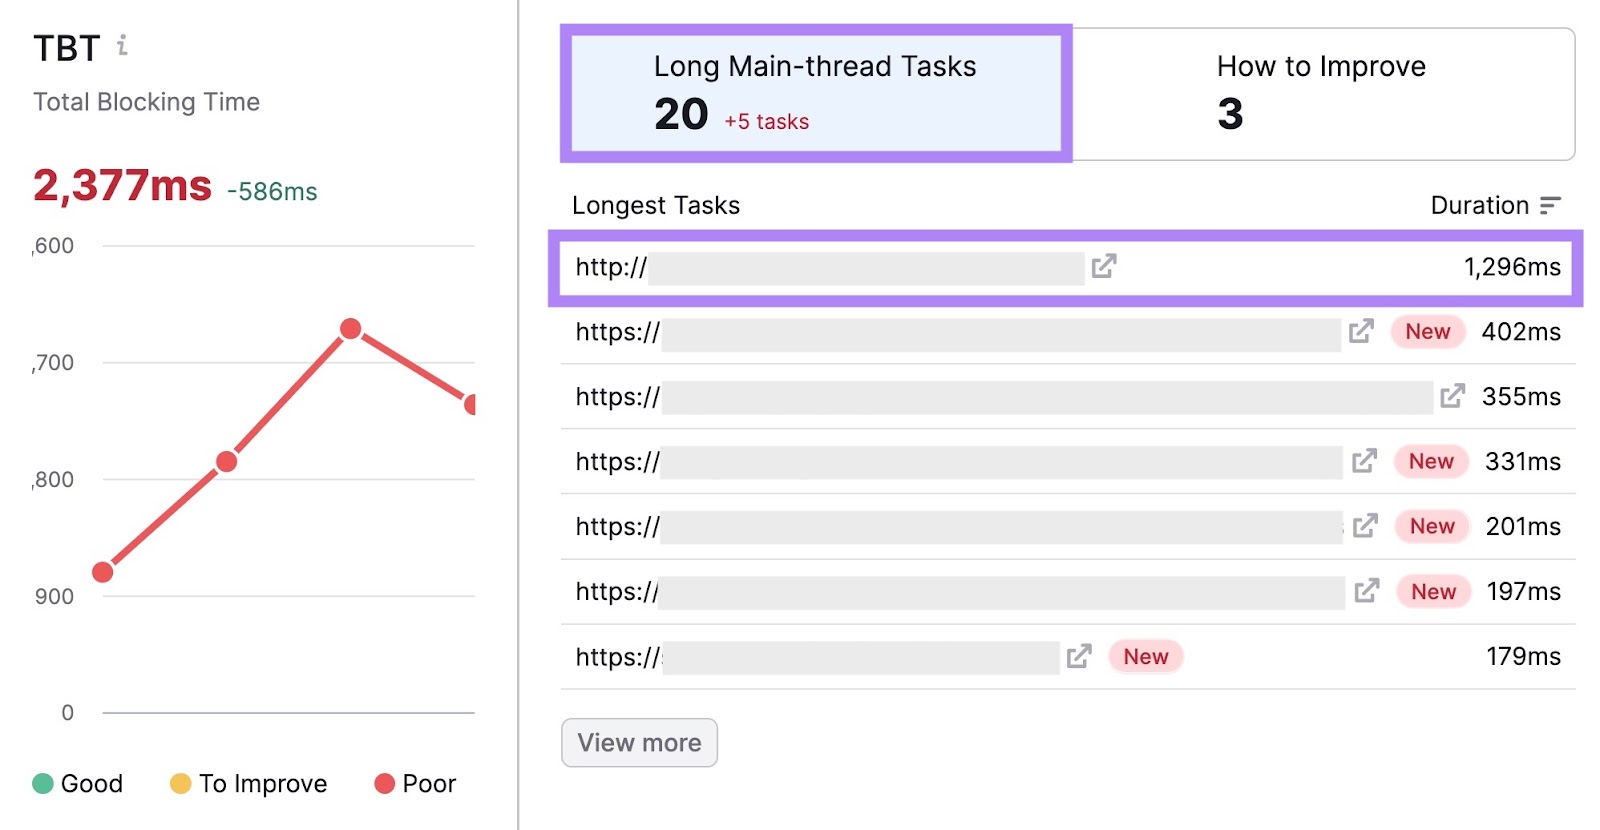 A list of the longest tasks slowing down a specific page on "TBT" with the "Long Main-thread Tasks" box highlighted.